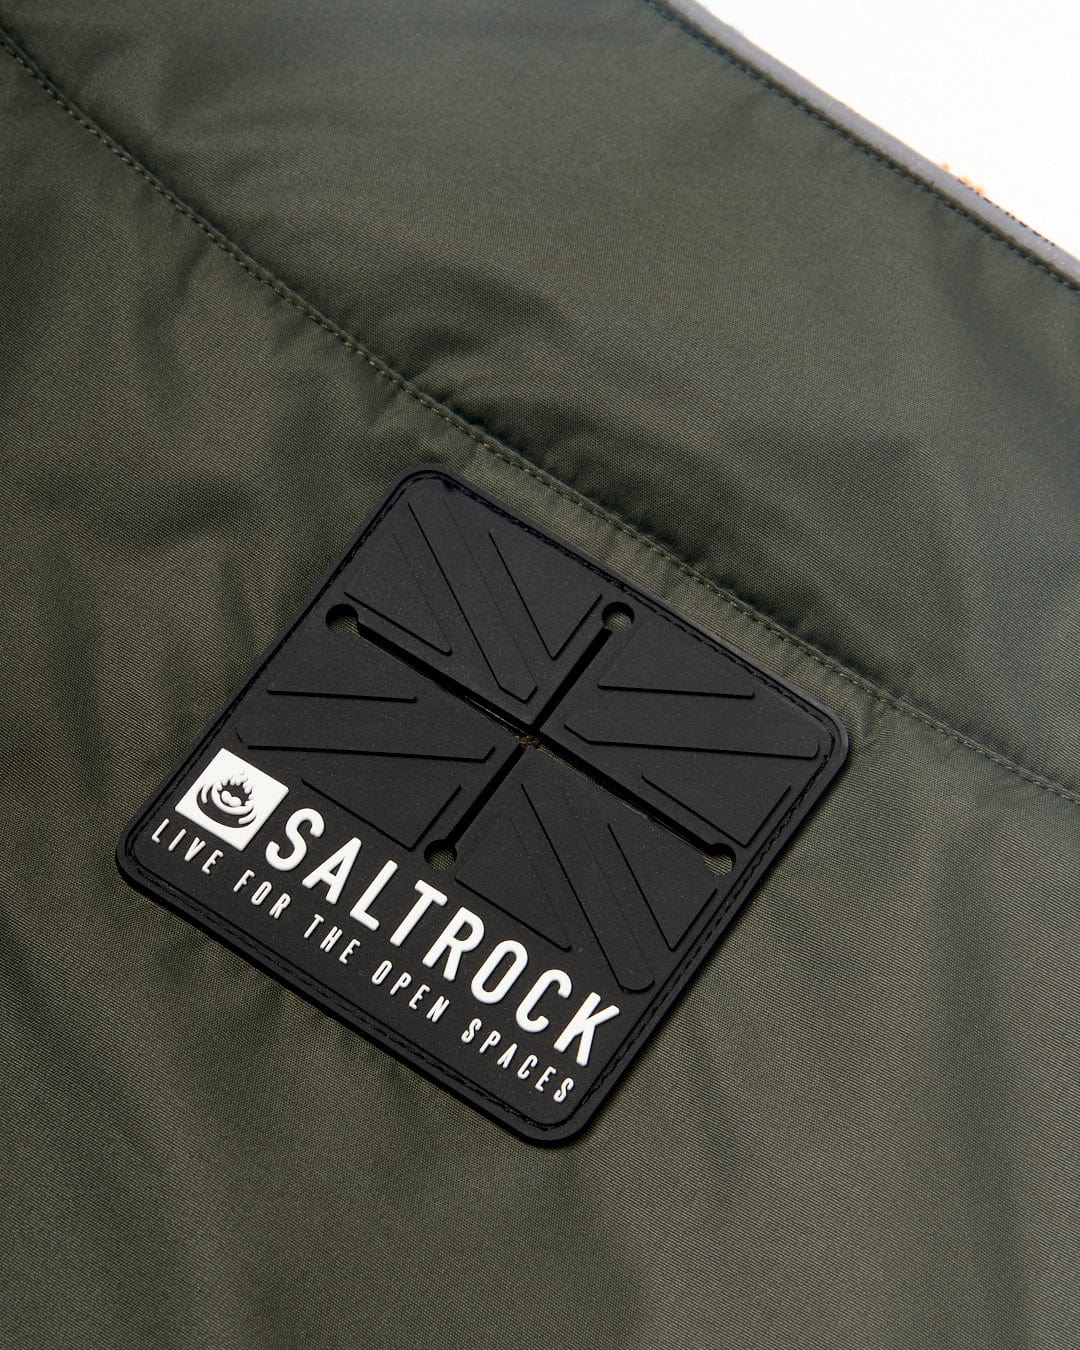 Close-up view of a black Saltrock logo patch on a Waga Water Resistant Padded Dog Jacket - Green fabric background.